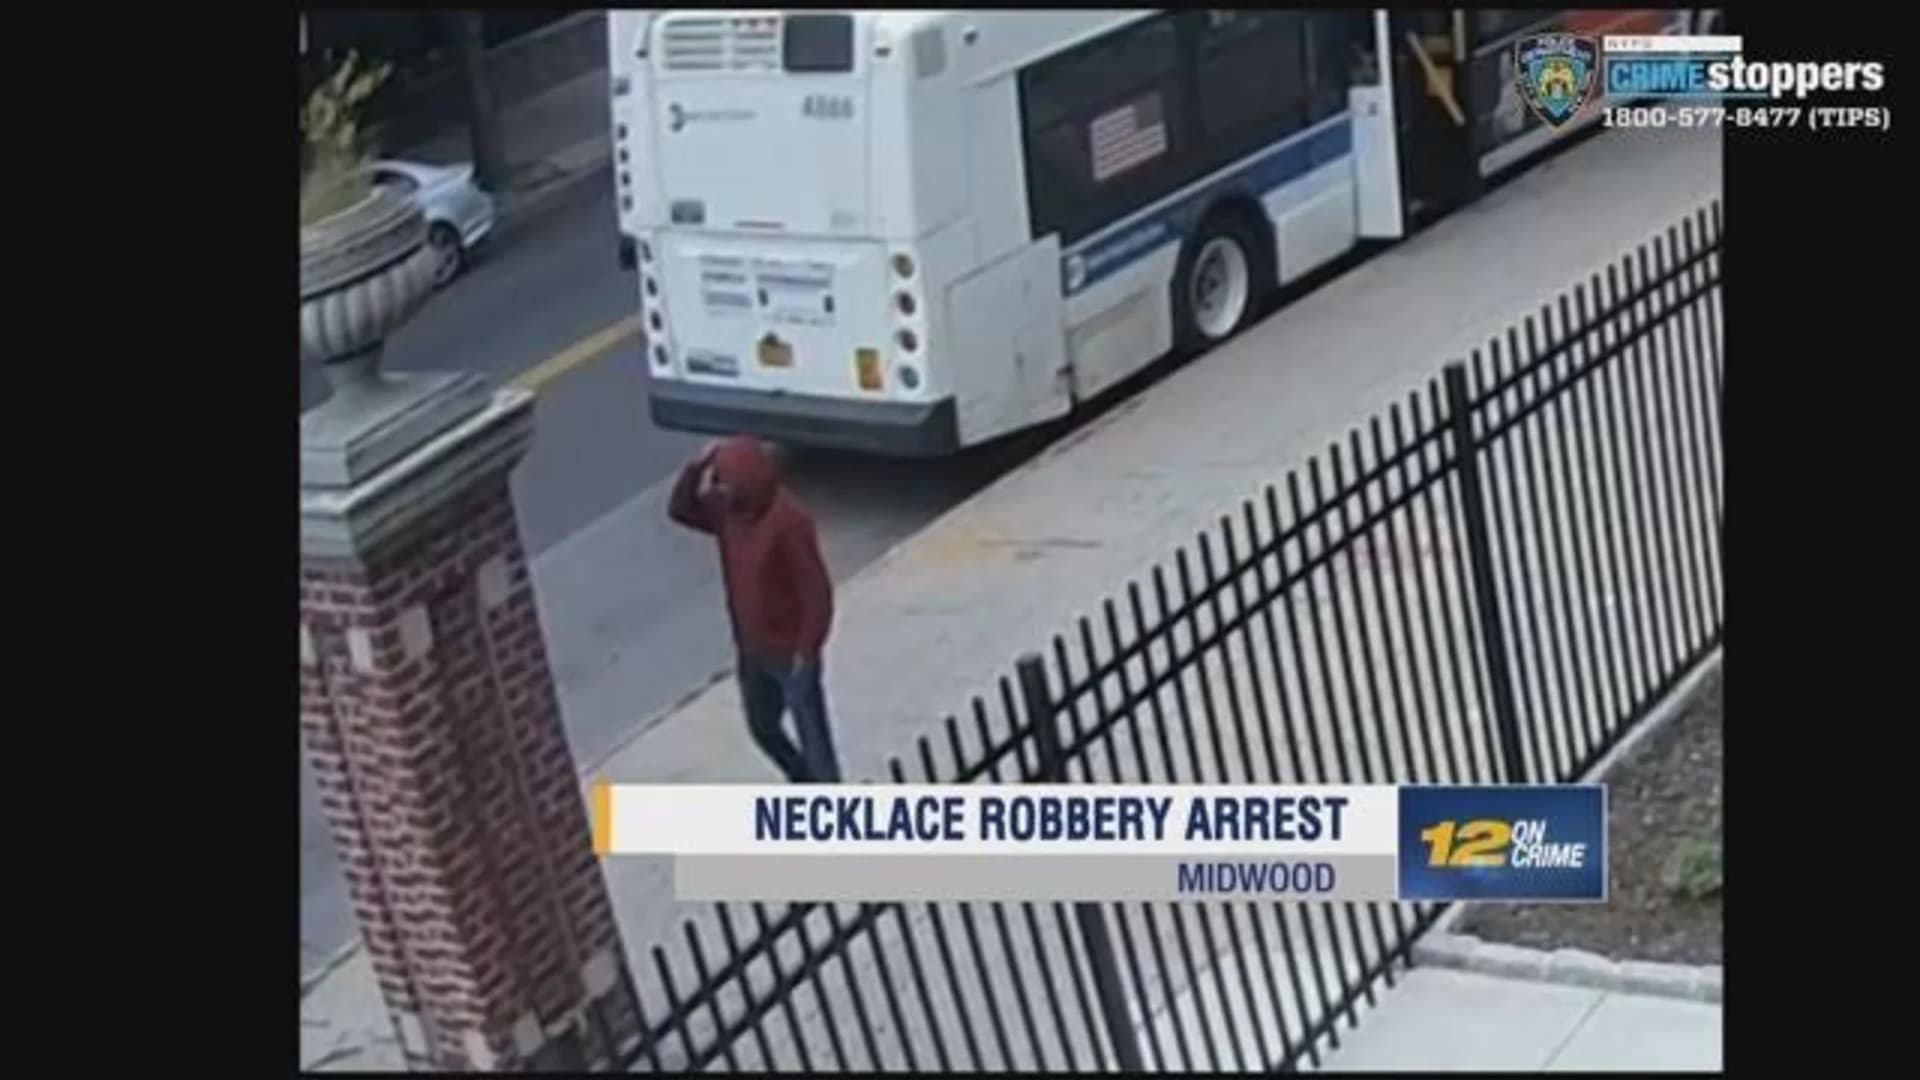 Police: Man arrested for Midwood necklace robbery